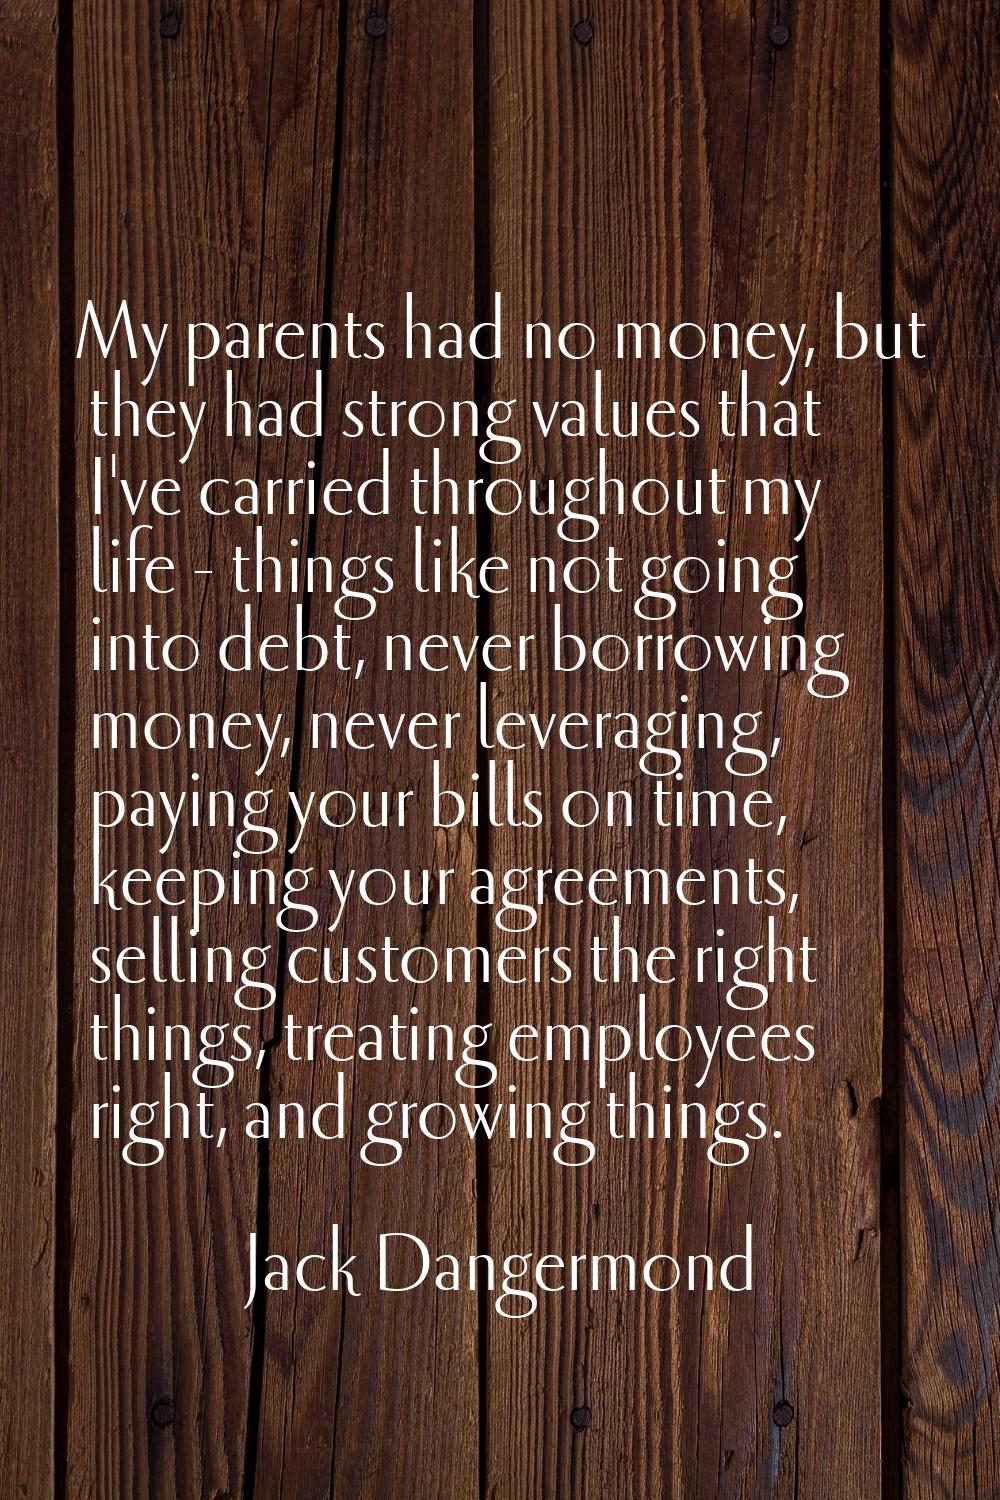 My parents had no money, but they had strong values that I've carried throughout my life - things l